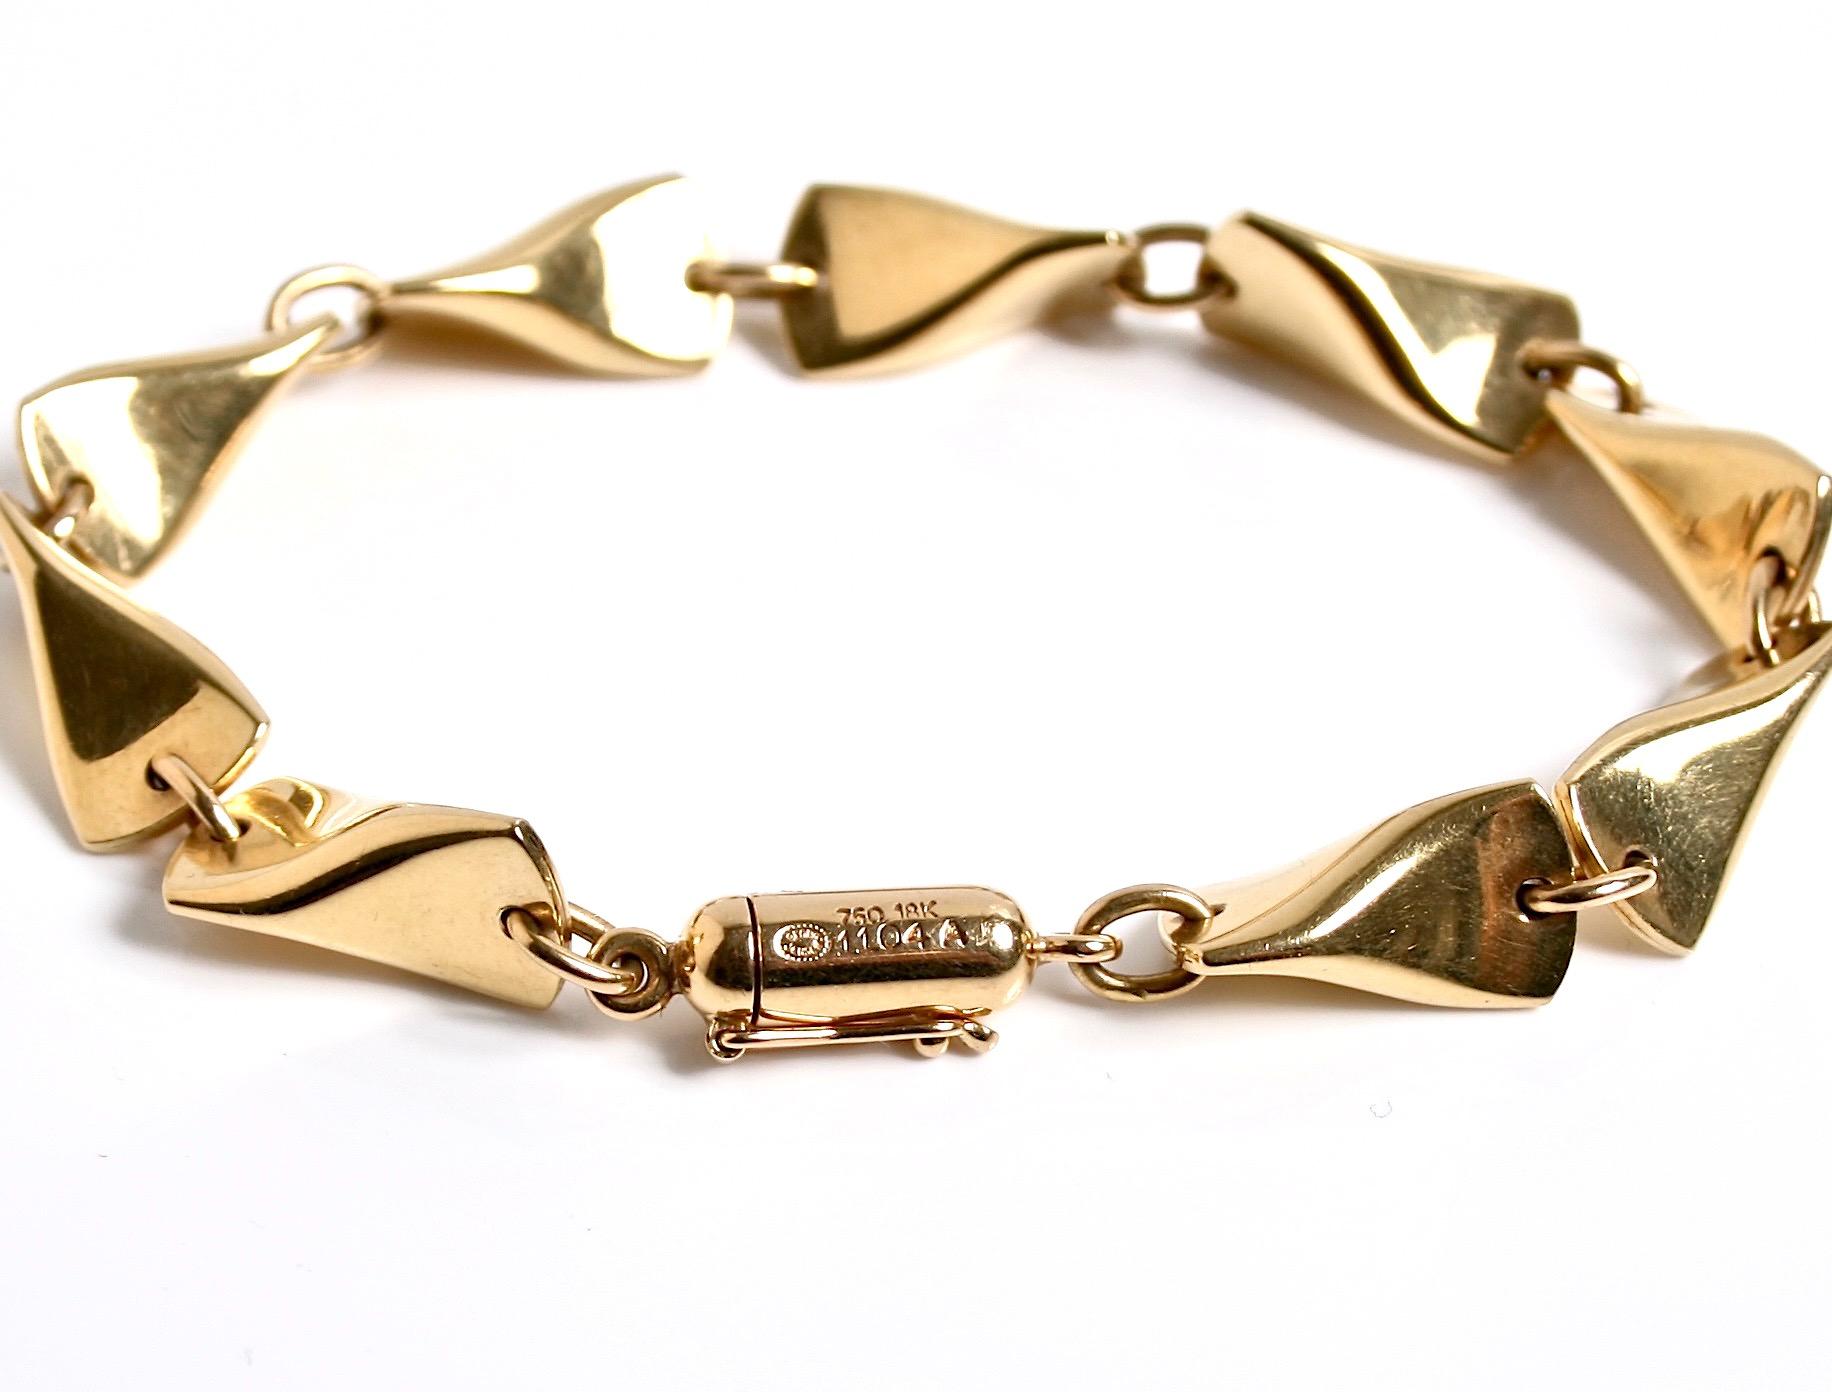 Georg Jensen 18 Karat solid Gold Butterfly Bracelet designed by Edvard Kindt Larsen Denmark c.1950
featuring early barrel clasp with safety catch
Design number 1104A
Presented in an original Georg Jensen Box
Matching Necklace available